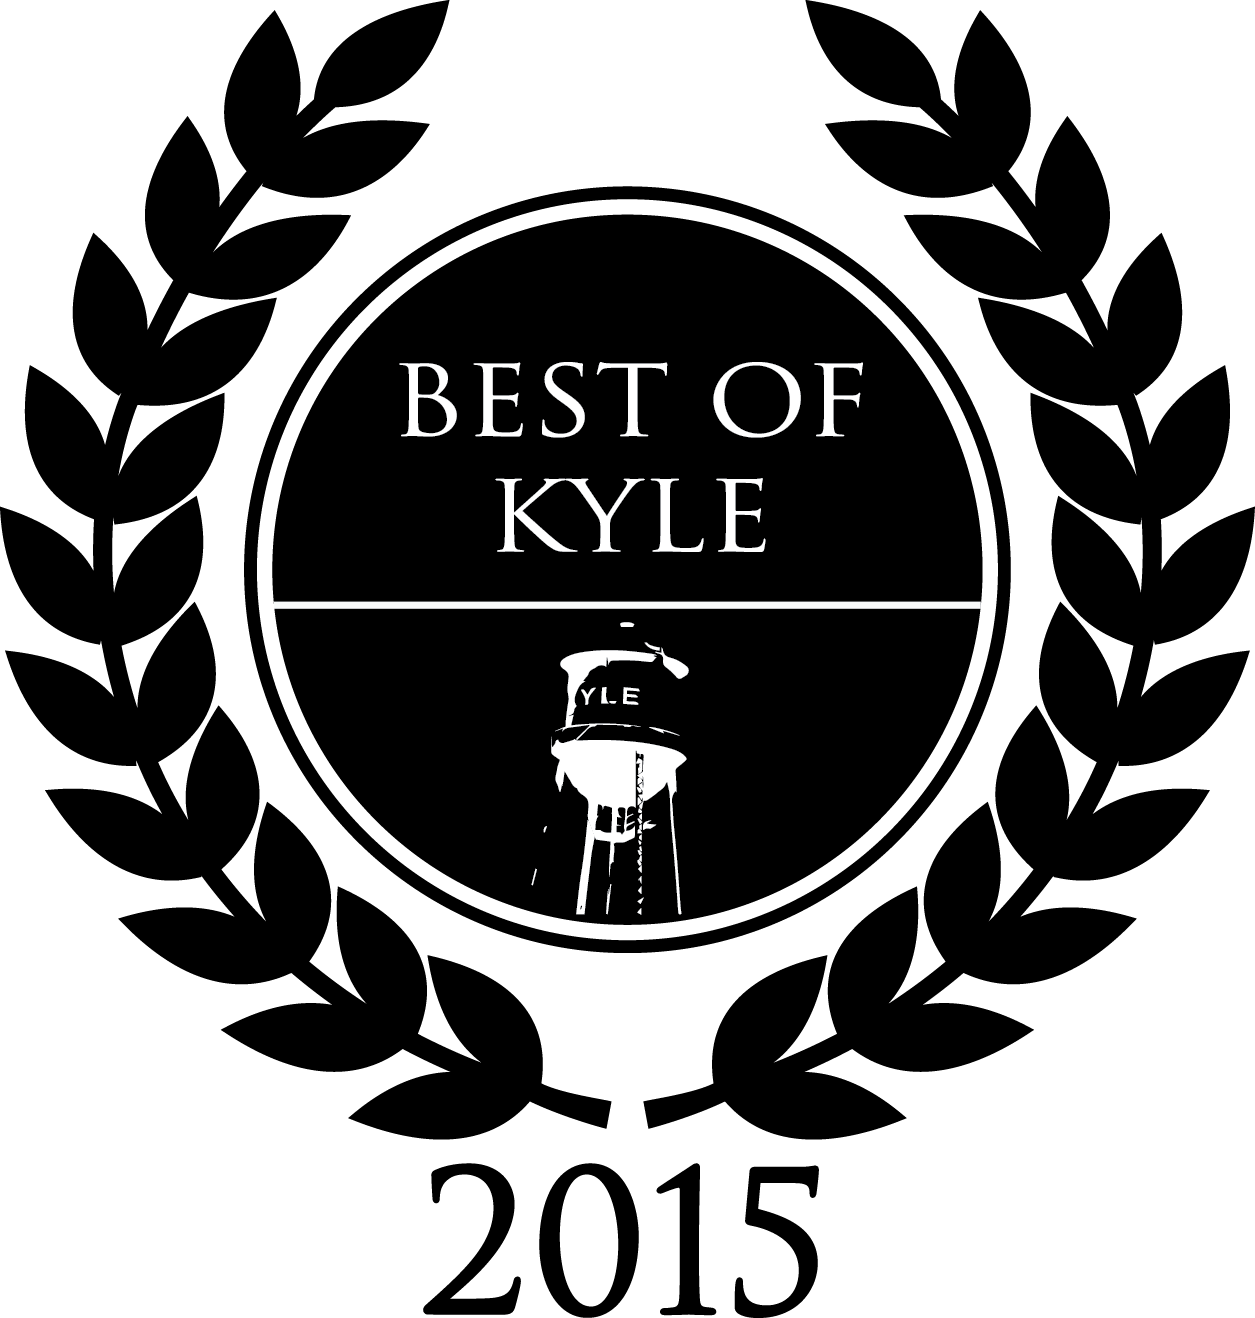 Best of Kyle 2015 – Results